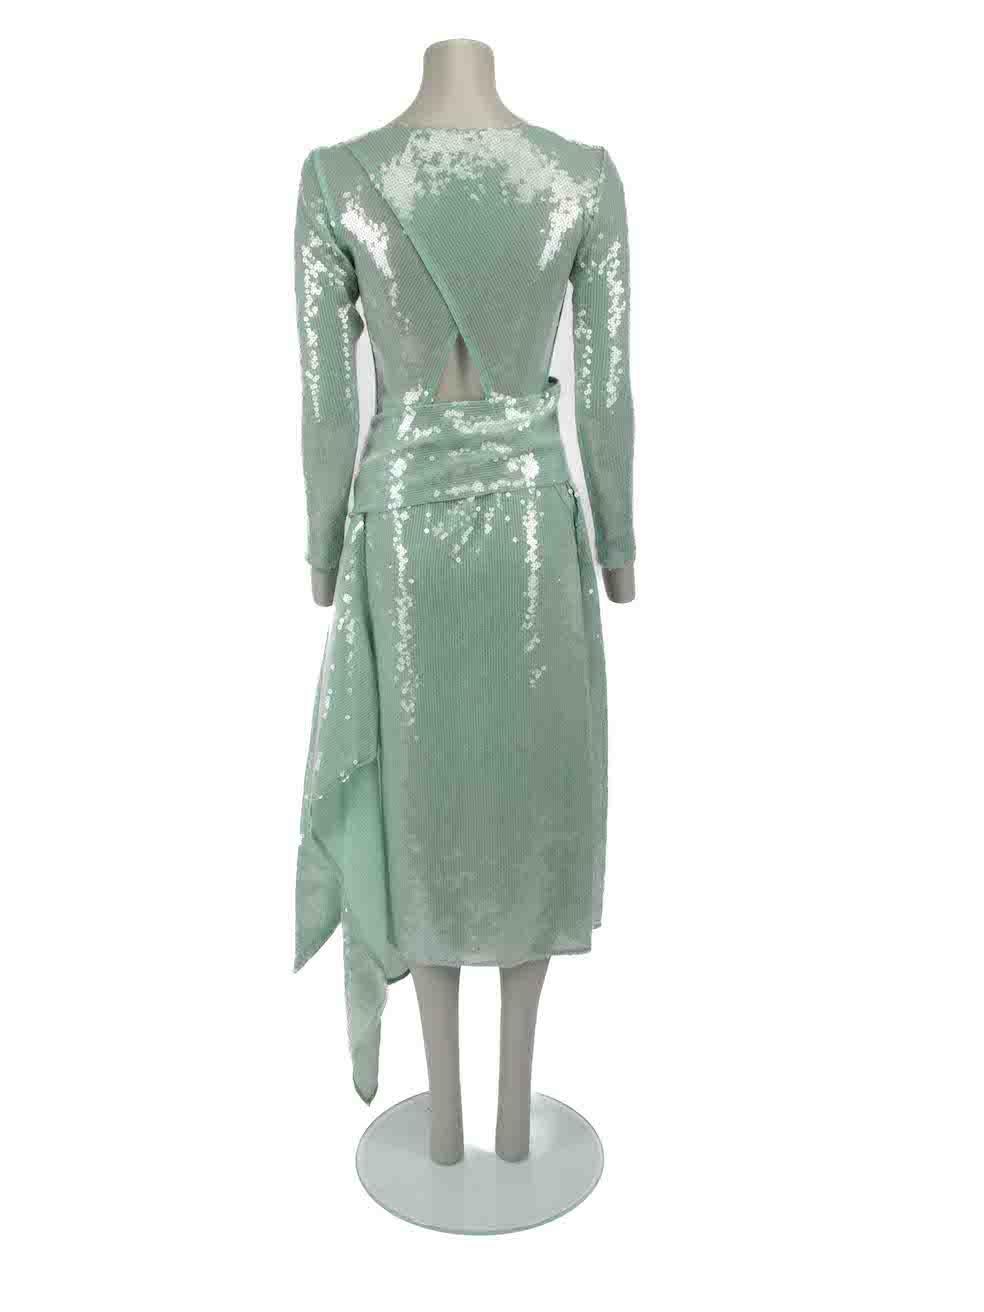 Roland Mouret Mint Green Belted Sequin Midi Dress Size S In Excellent Condition For Sale In London, GB